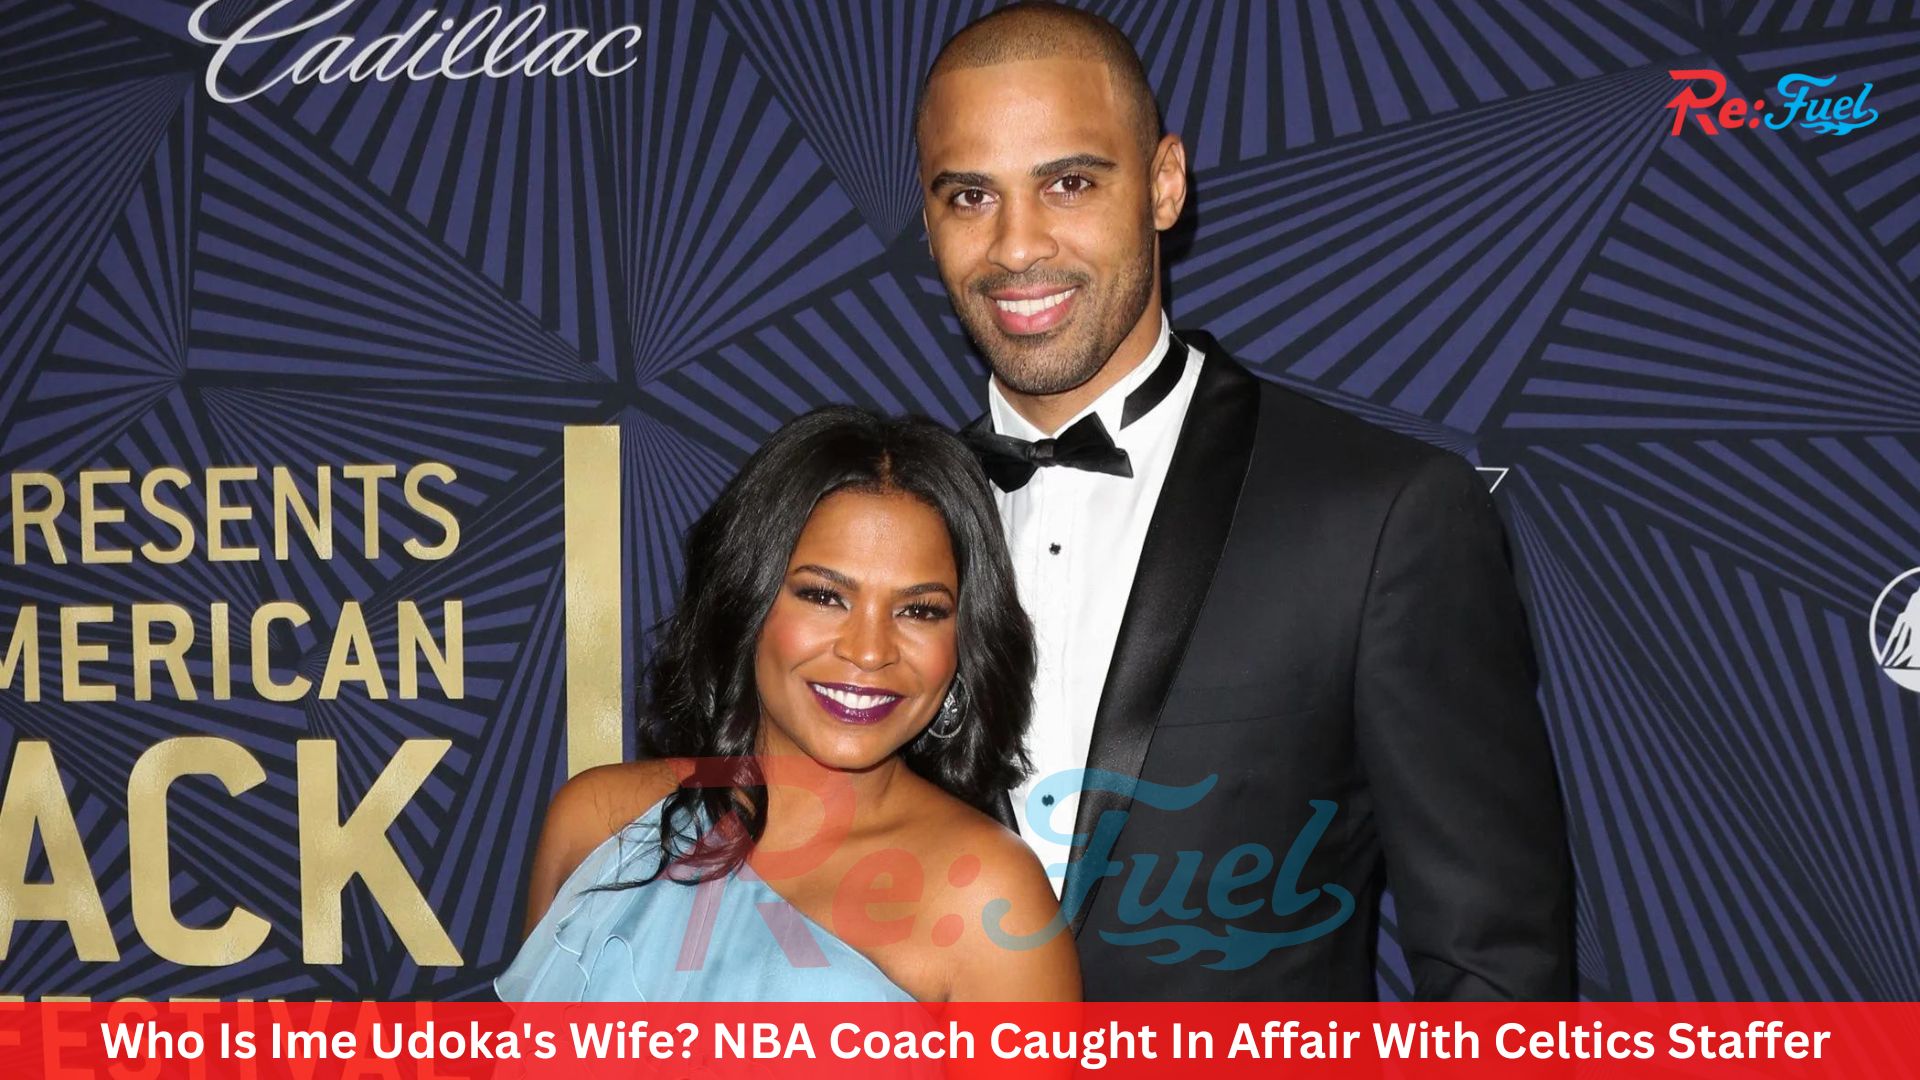 Who Is Ime Udoka's Wife? NBA Coach Caught In Affair With Celtics Staffer